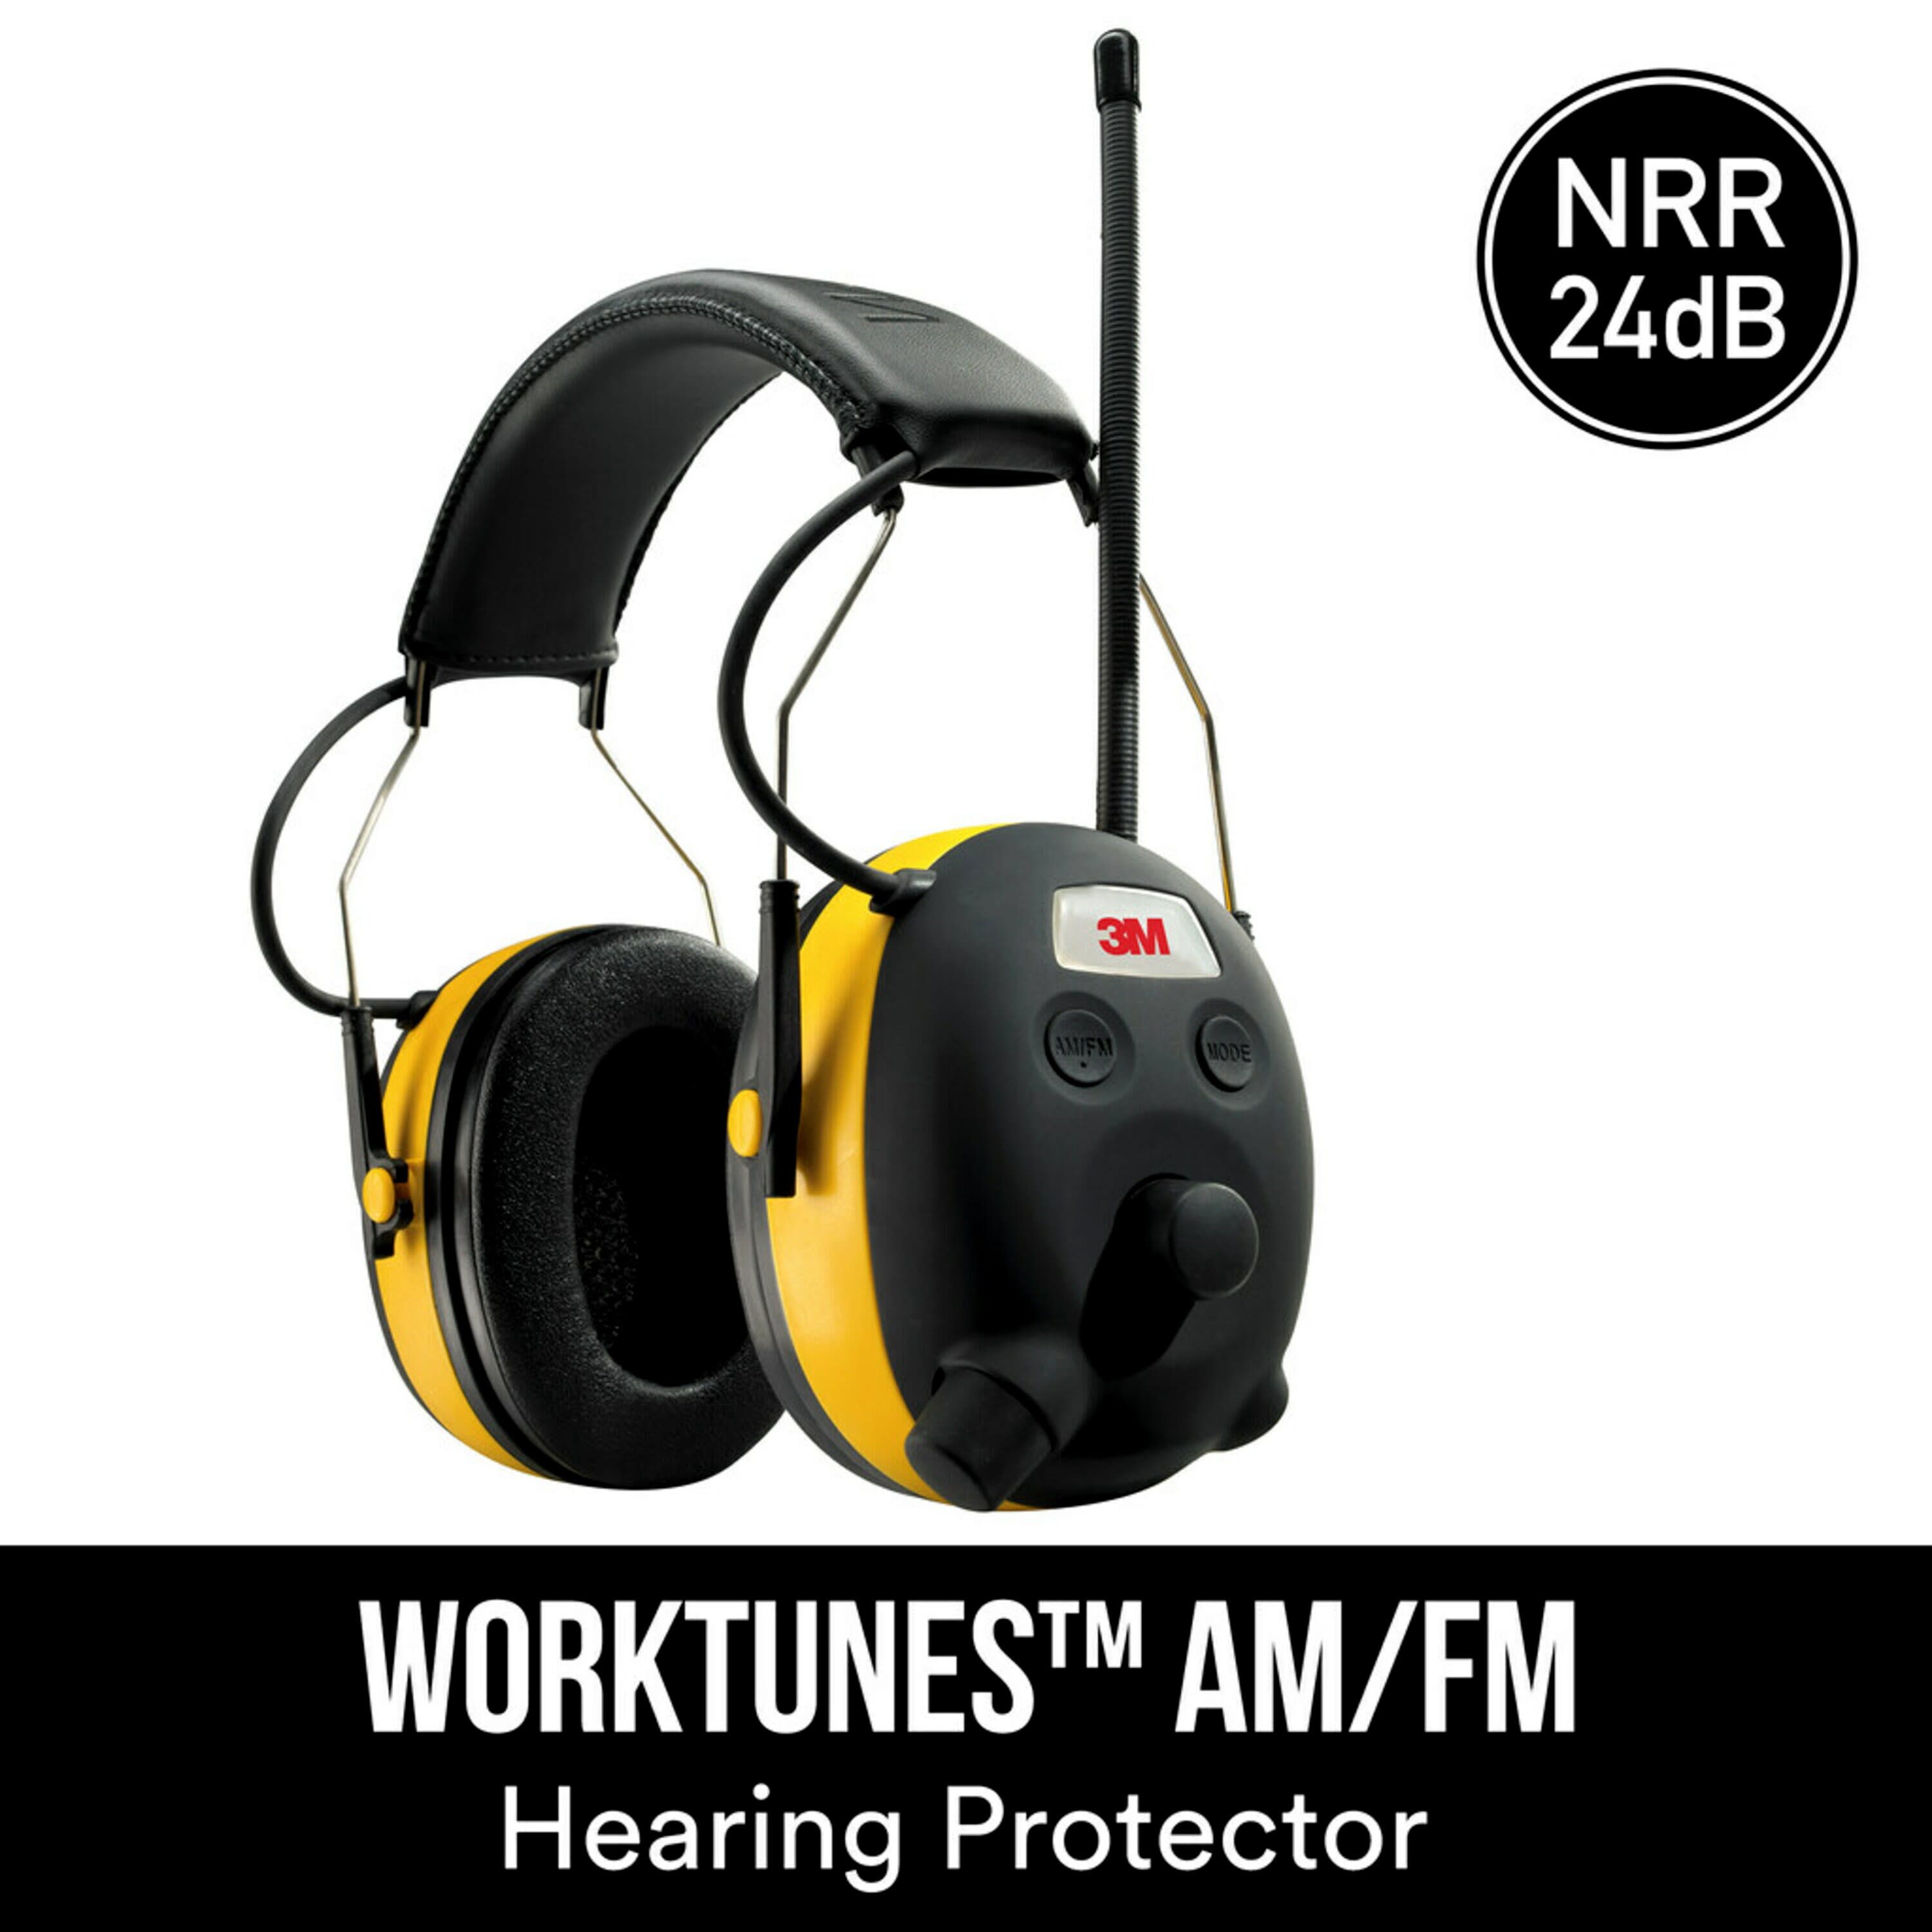 3M WorkTunes Hearing Protector with AM/FM Digital Radio - image 5 of 18